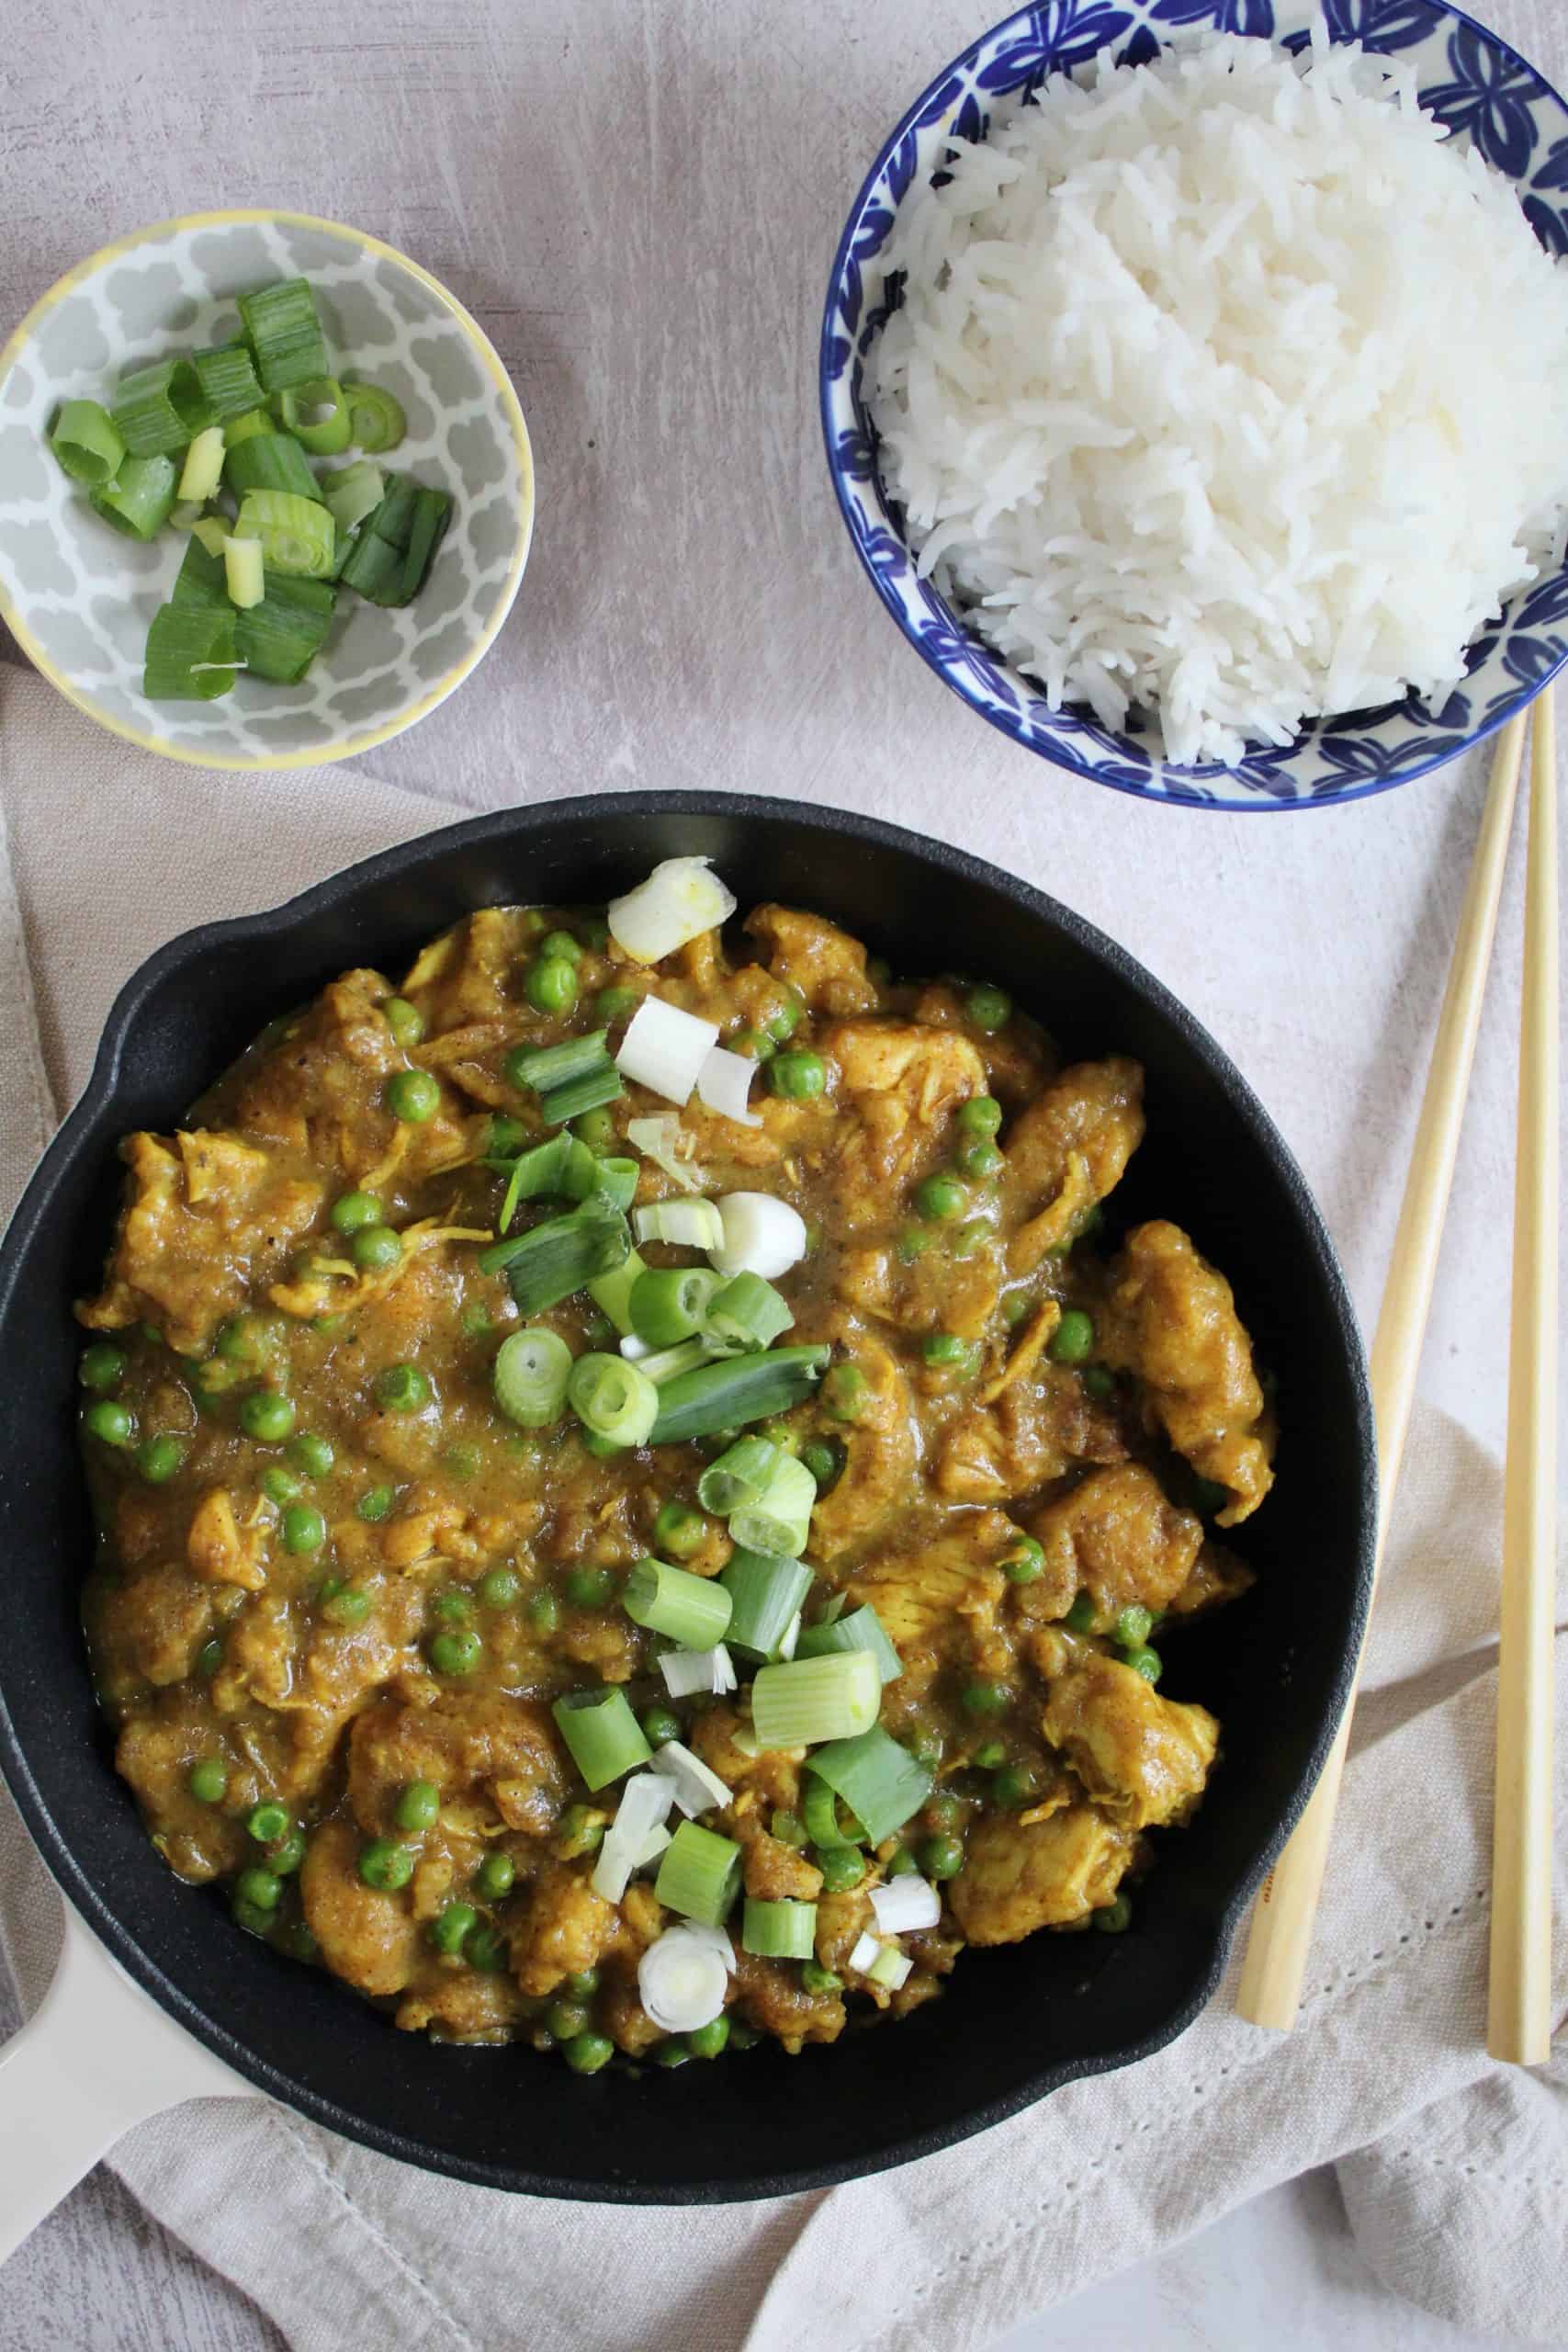 GLUTEN FREE CHINESE CURRY RECIPE 6 - The Gluten Free Blogger